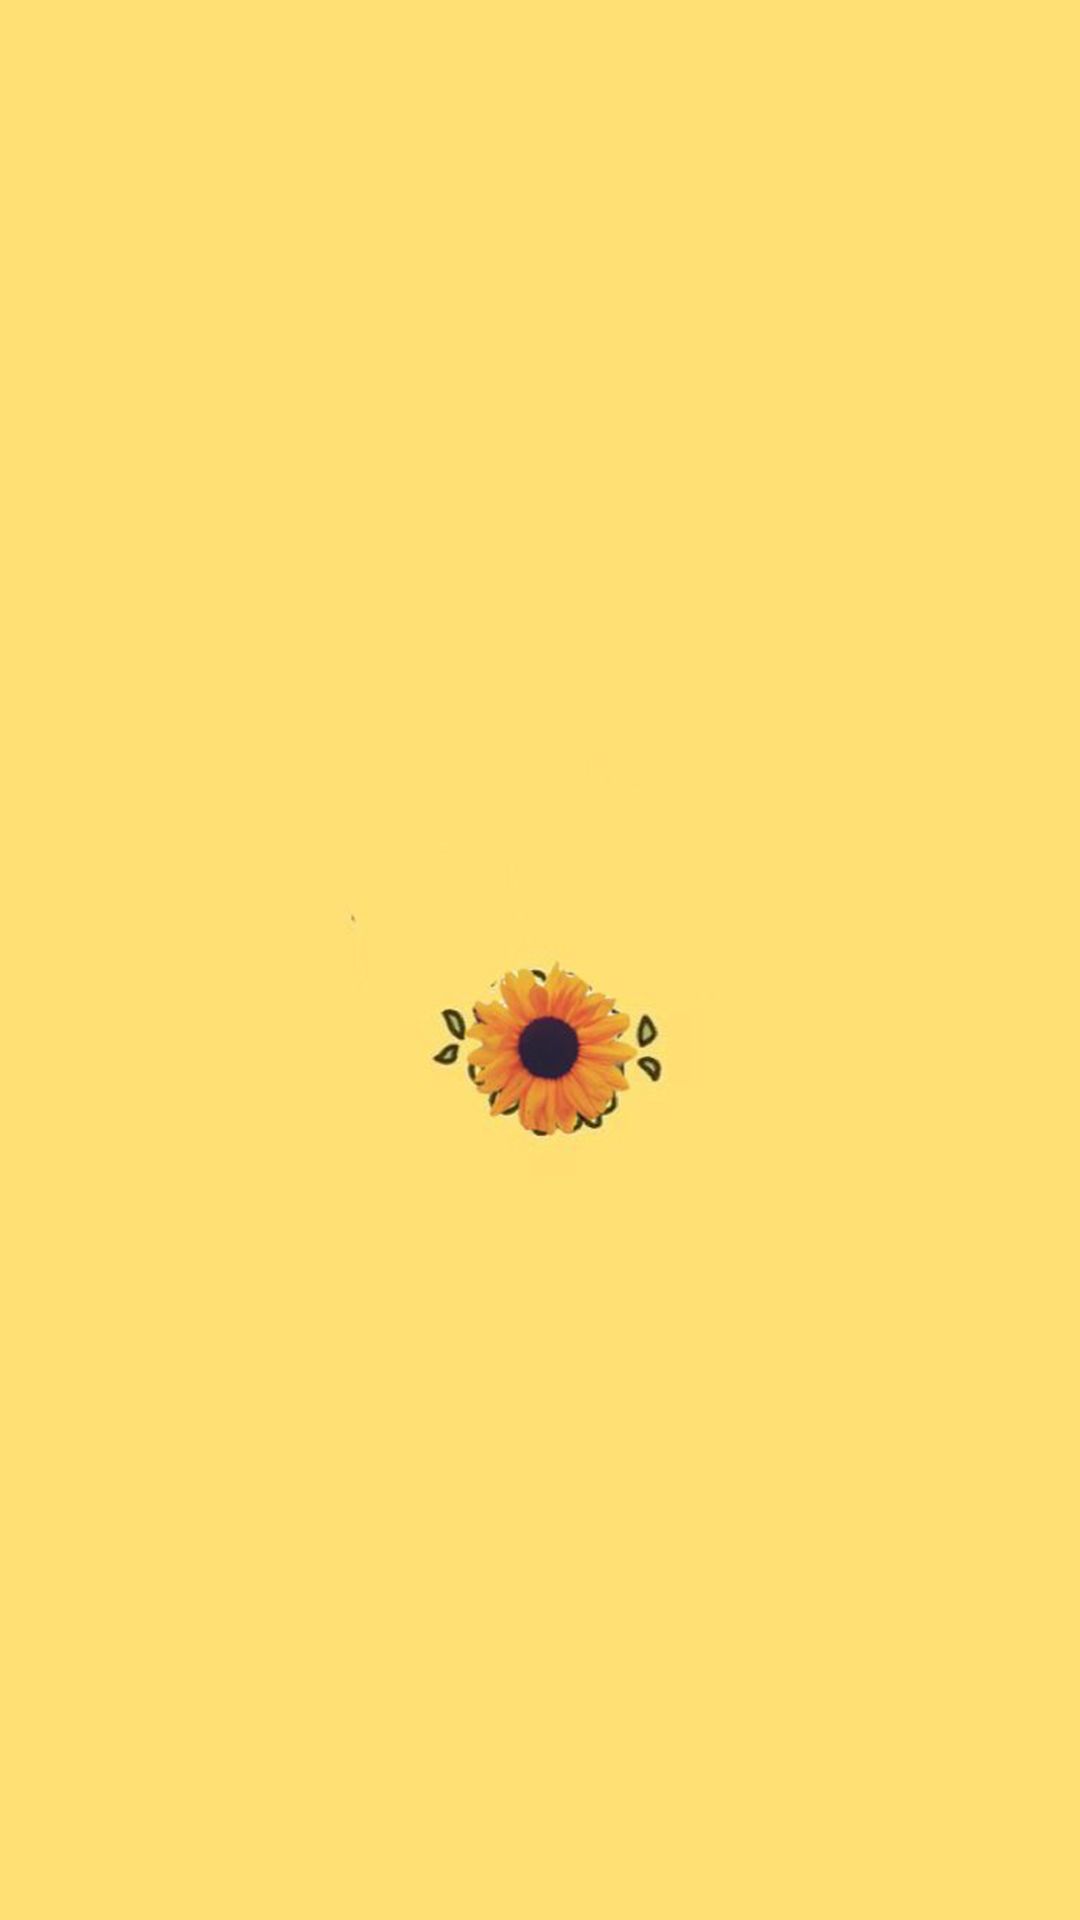 Yellow aesthetic wallpaper for phone with a sunflower - Light yellow, yellow iphone, Apple Watch